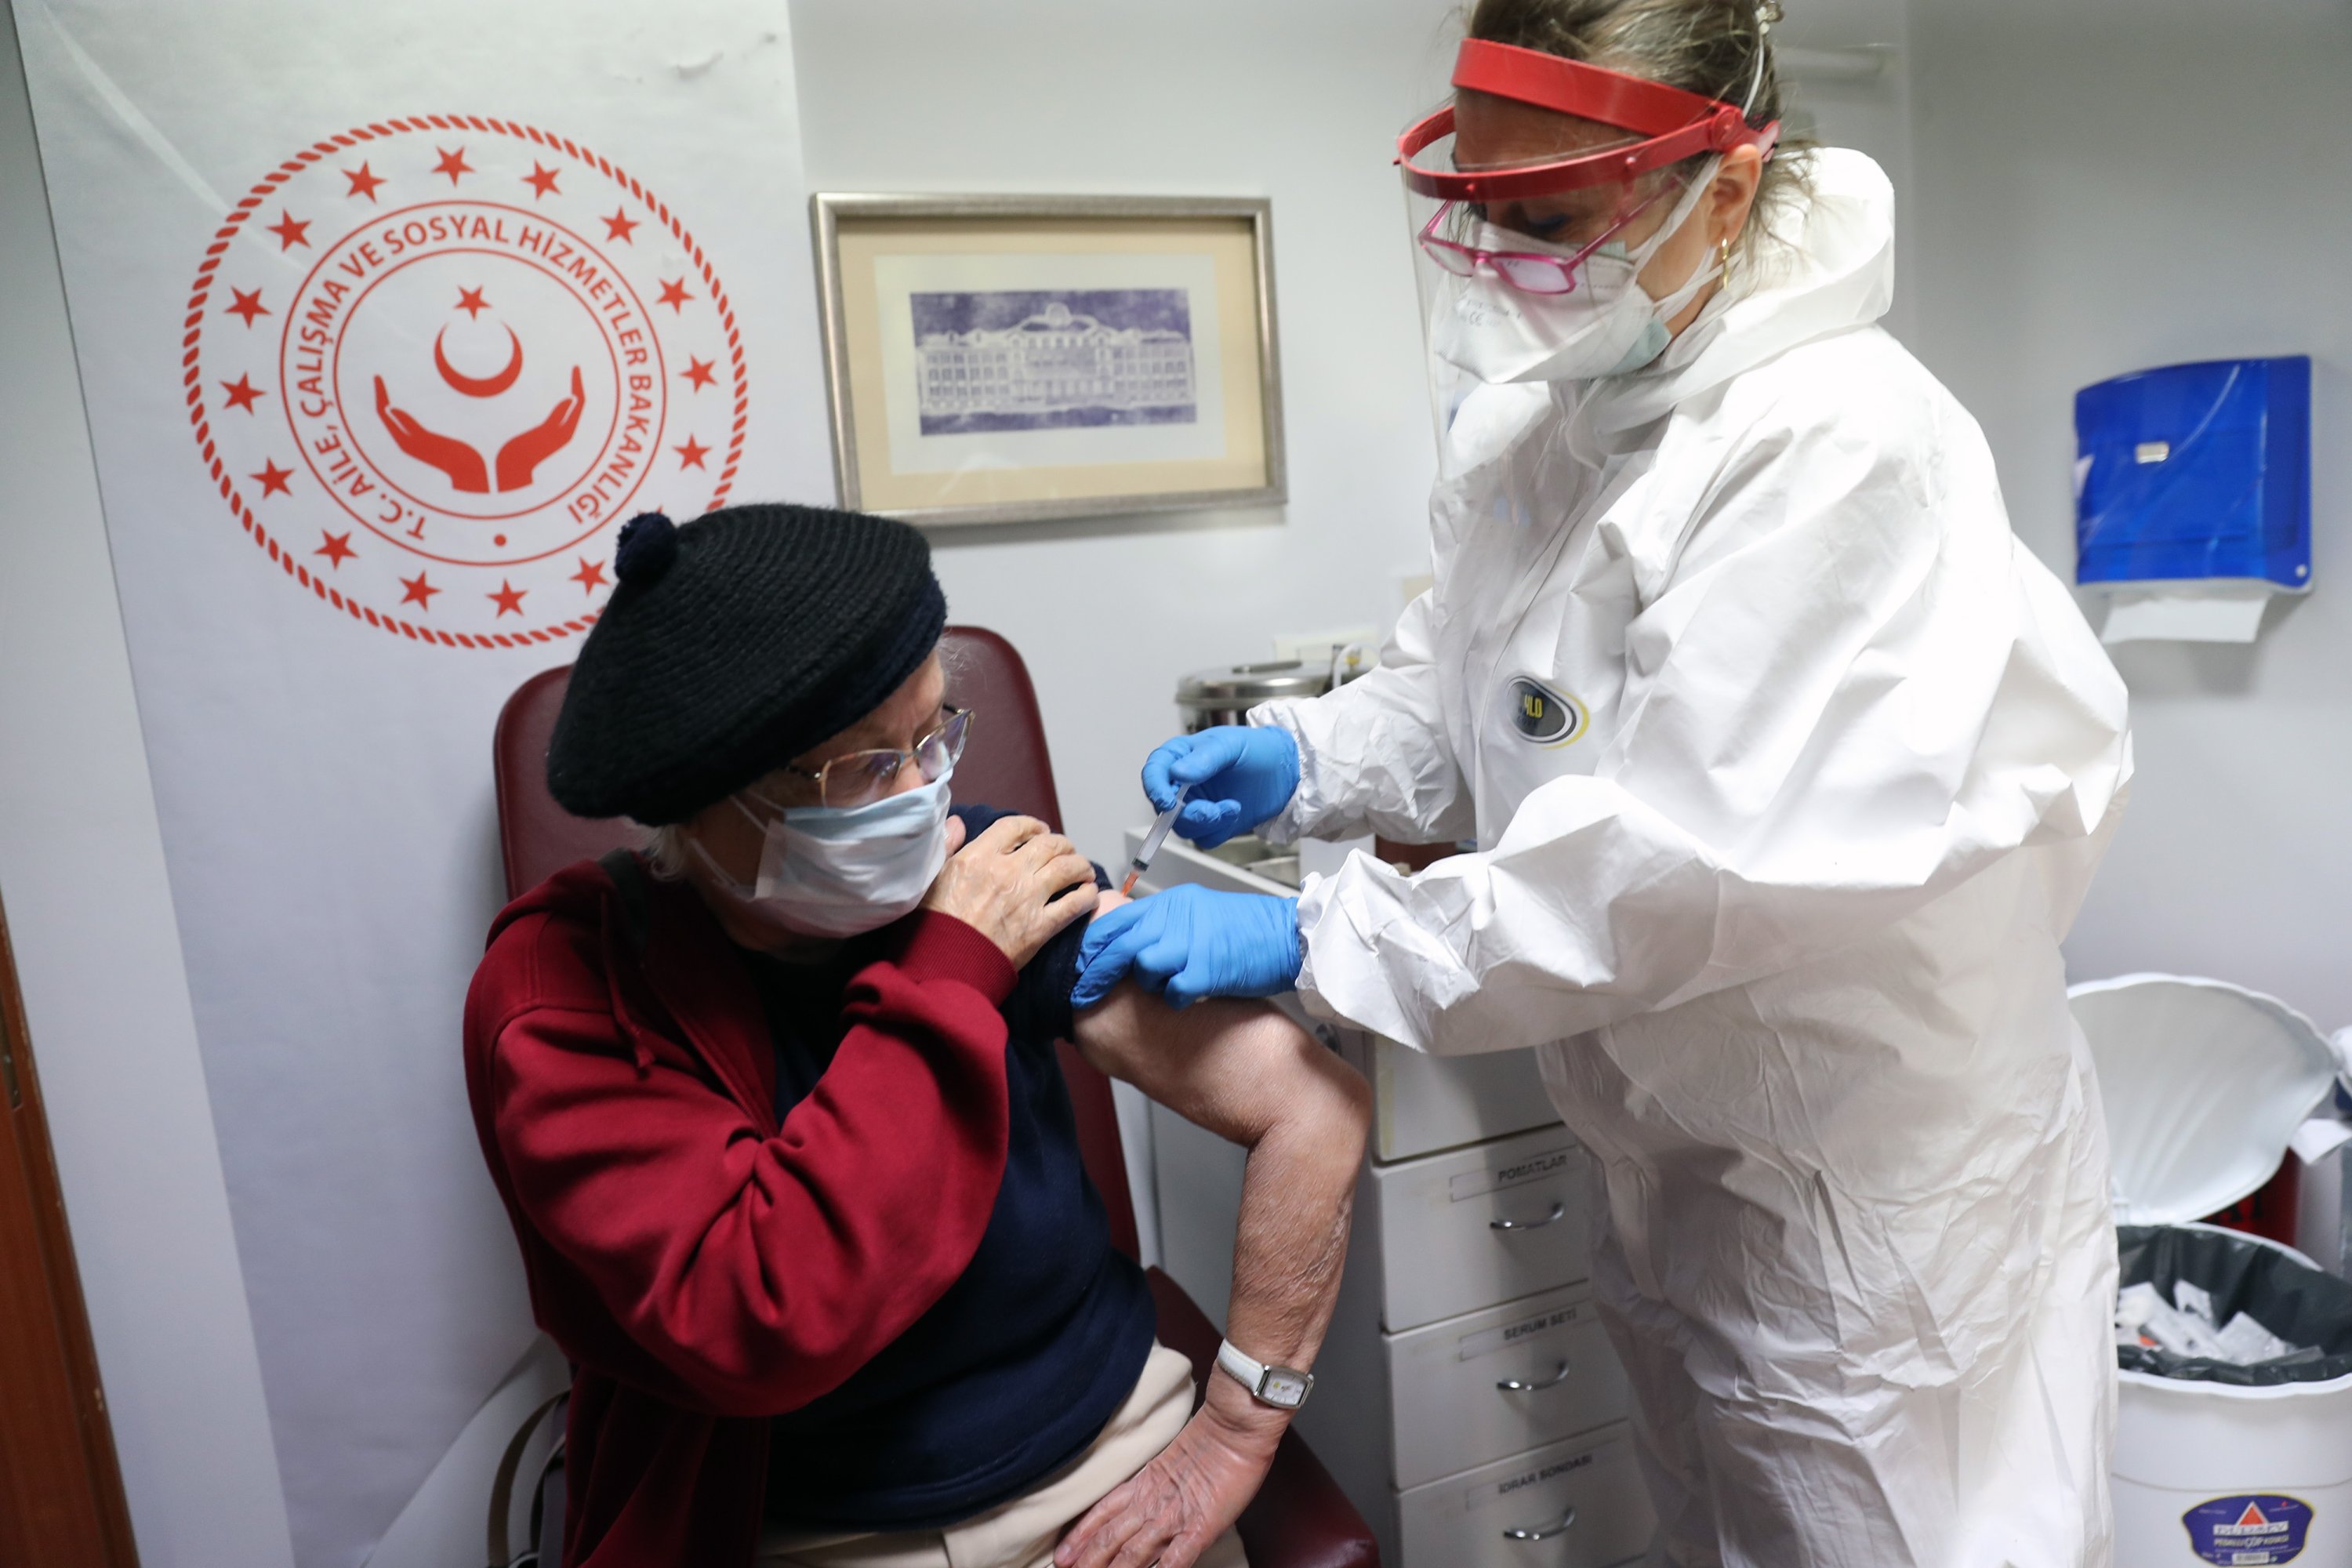 COVID-19 vaccinations in Turkey exceed 1 million in 1st week | Daily Sabah